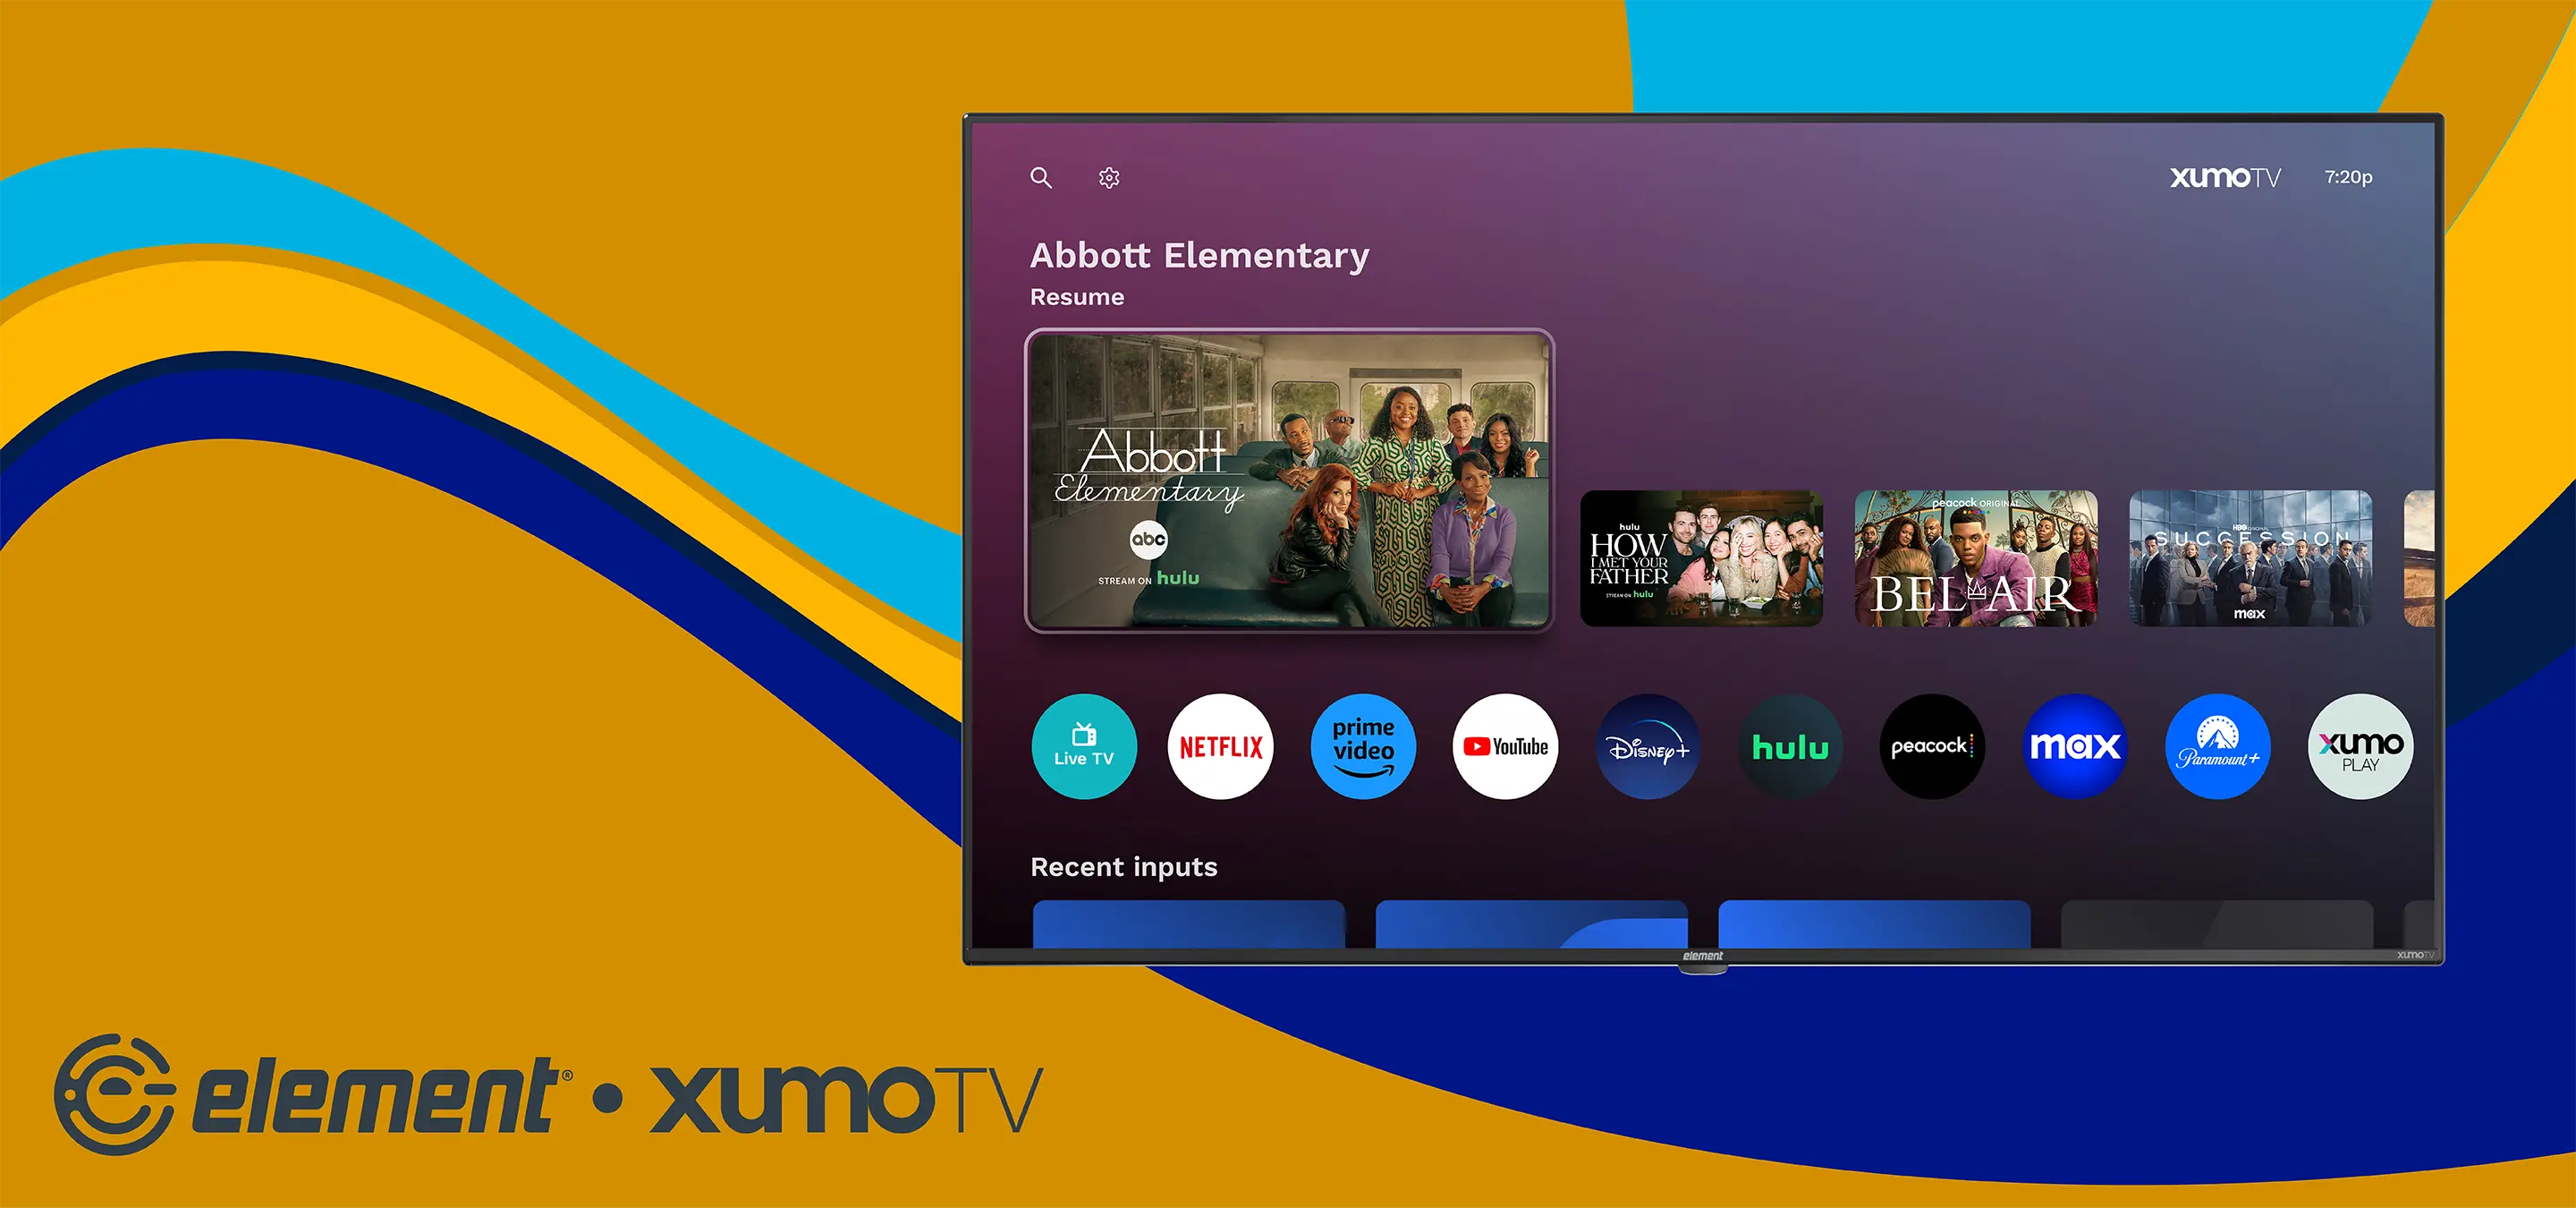 Xumo TV with a yellow background.